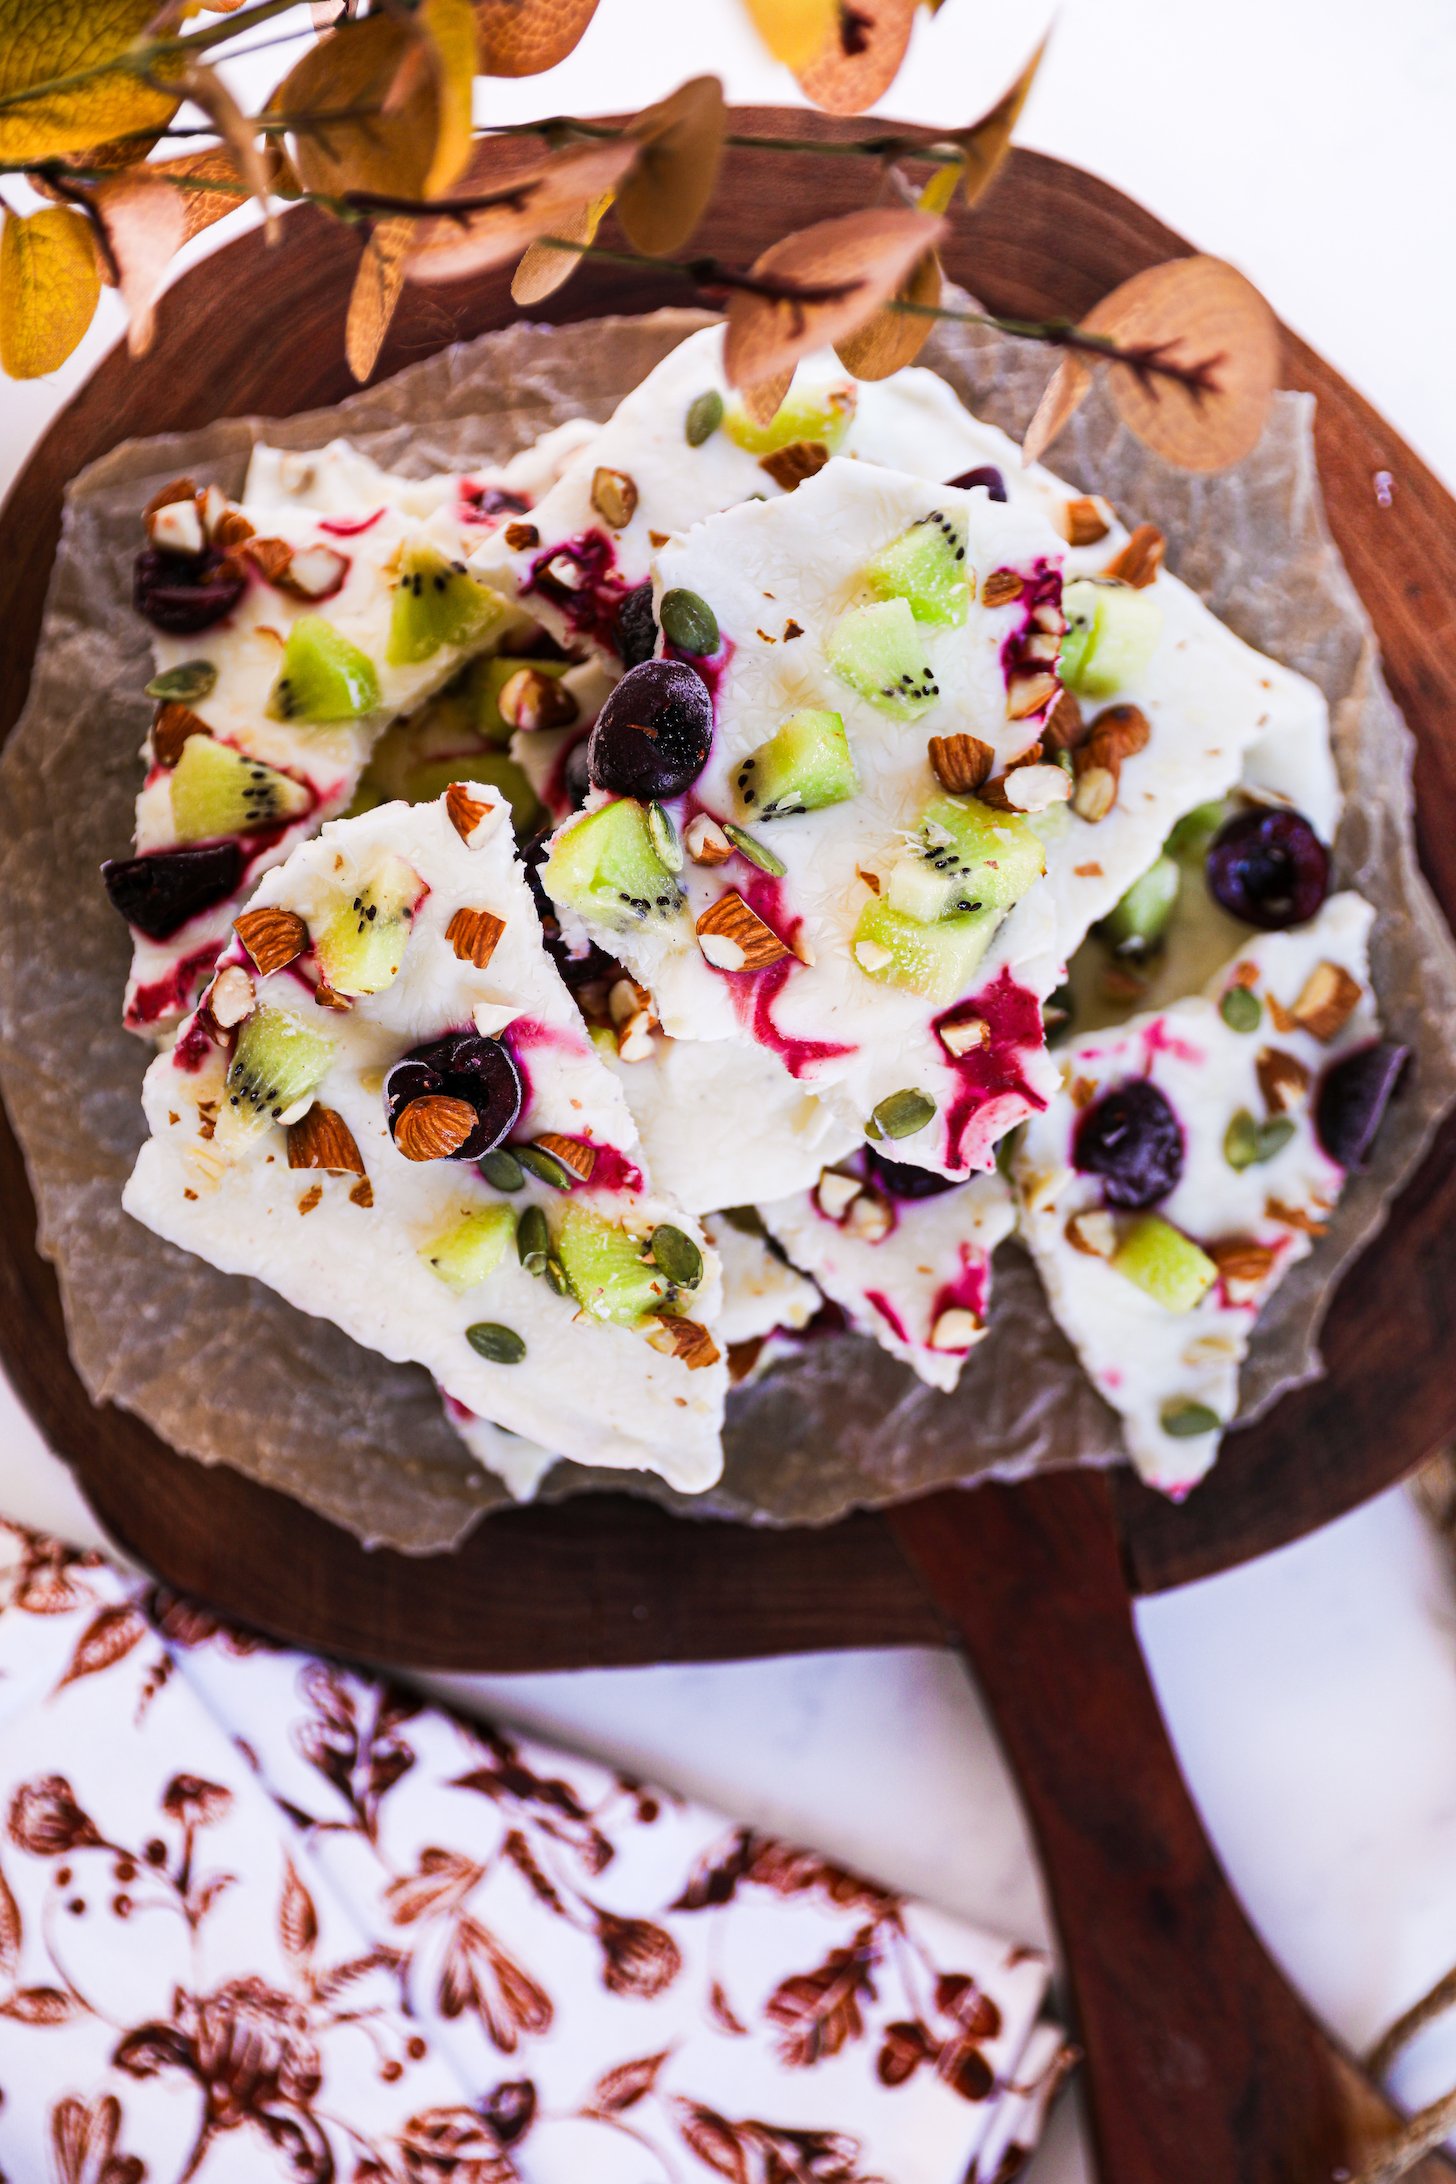 Yogurt bark broken into pieces, adorned with fruit and nuts, displayed on a wooden serving board.